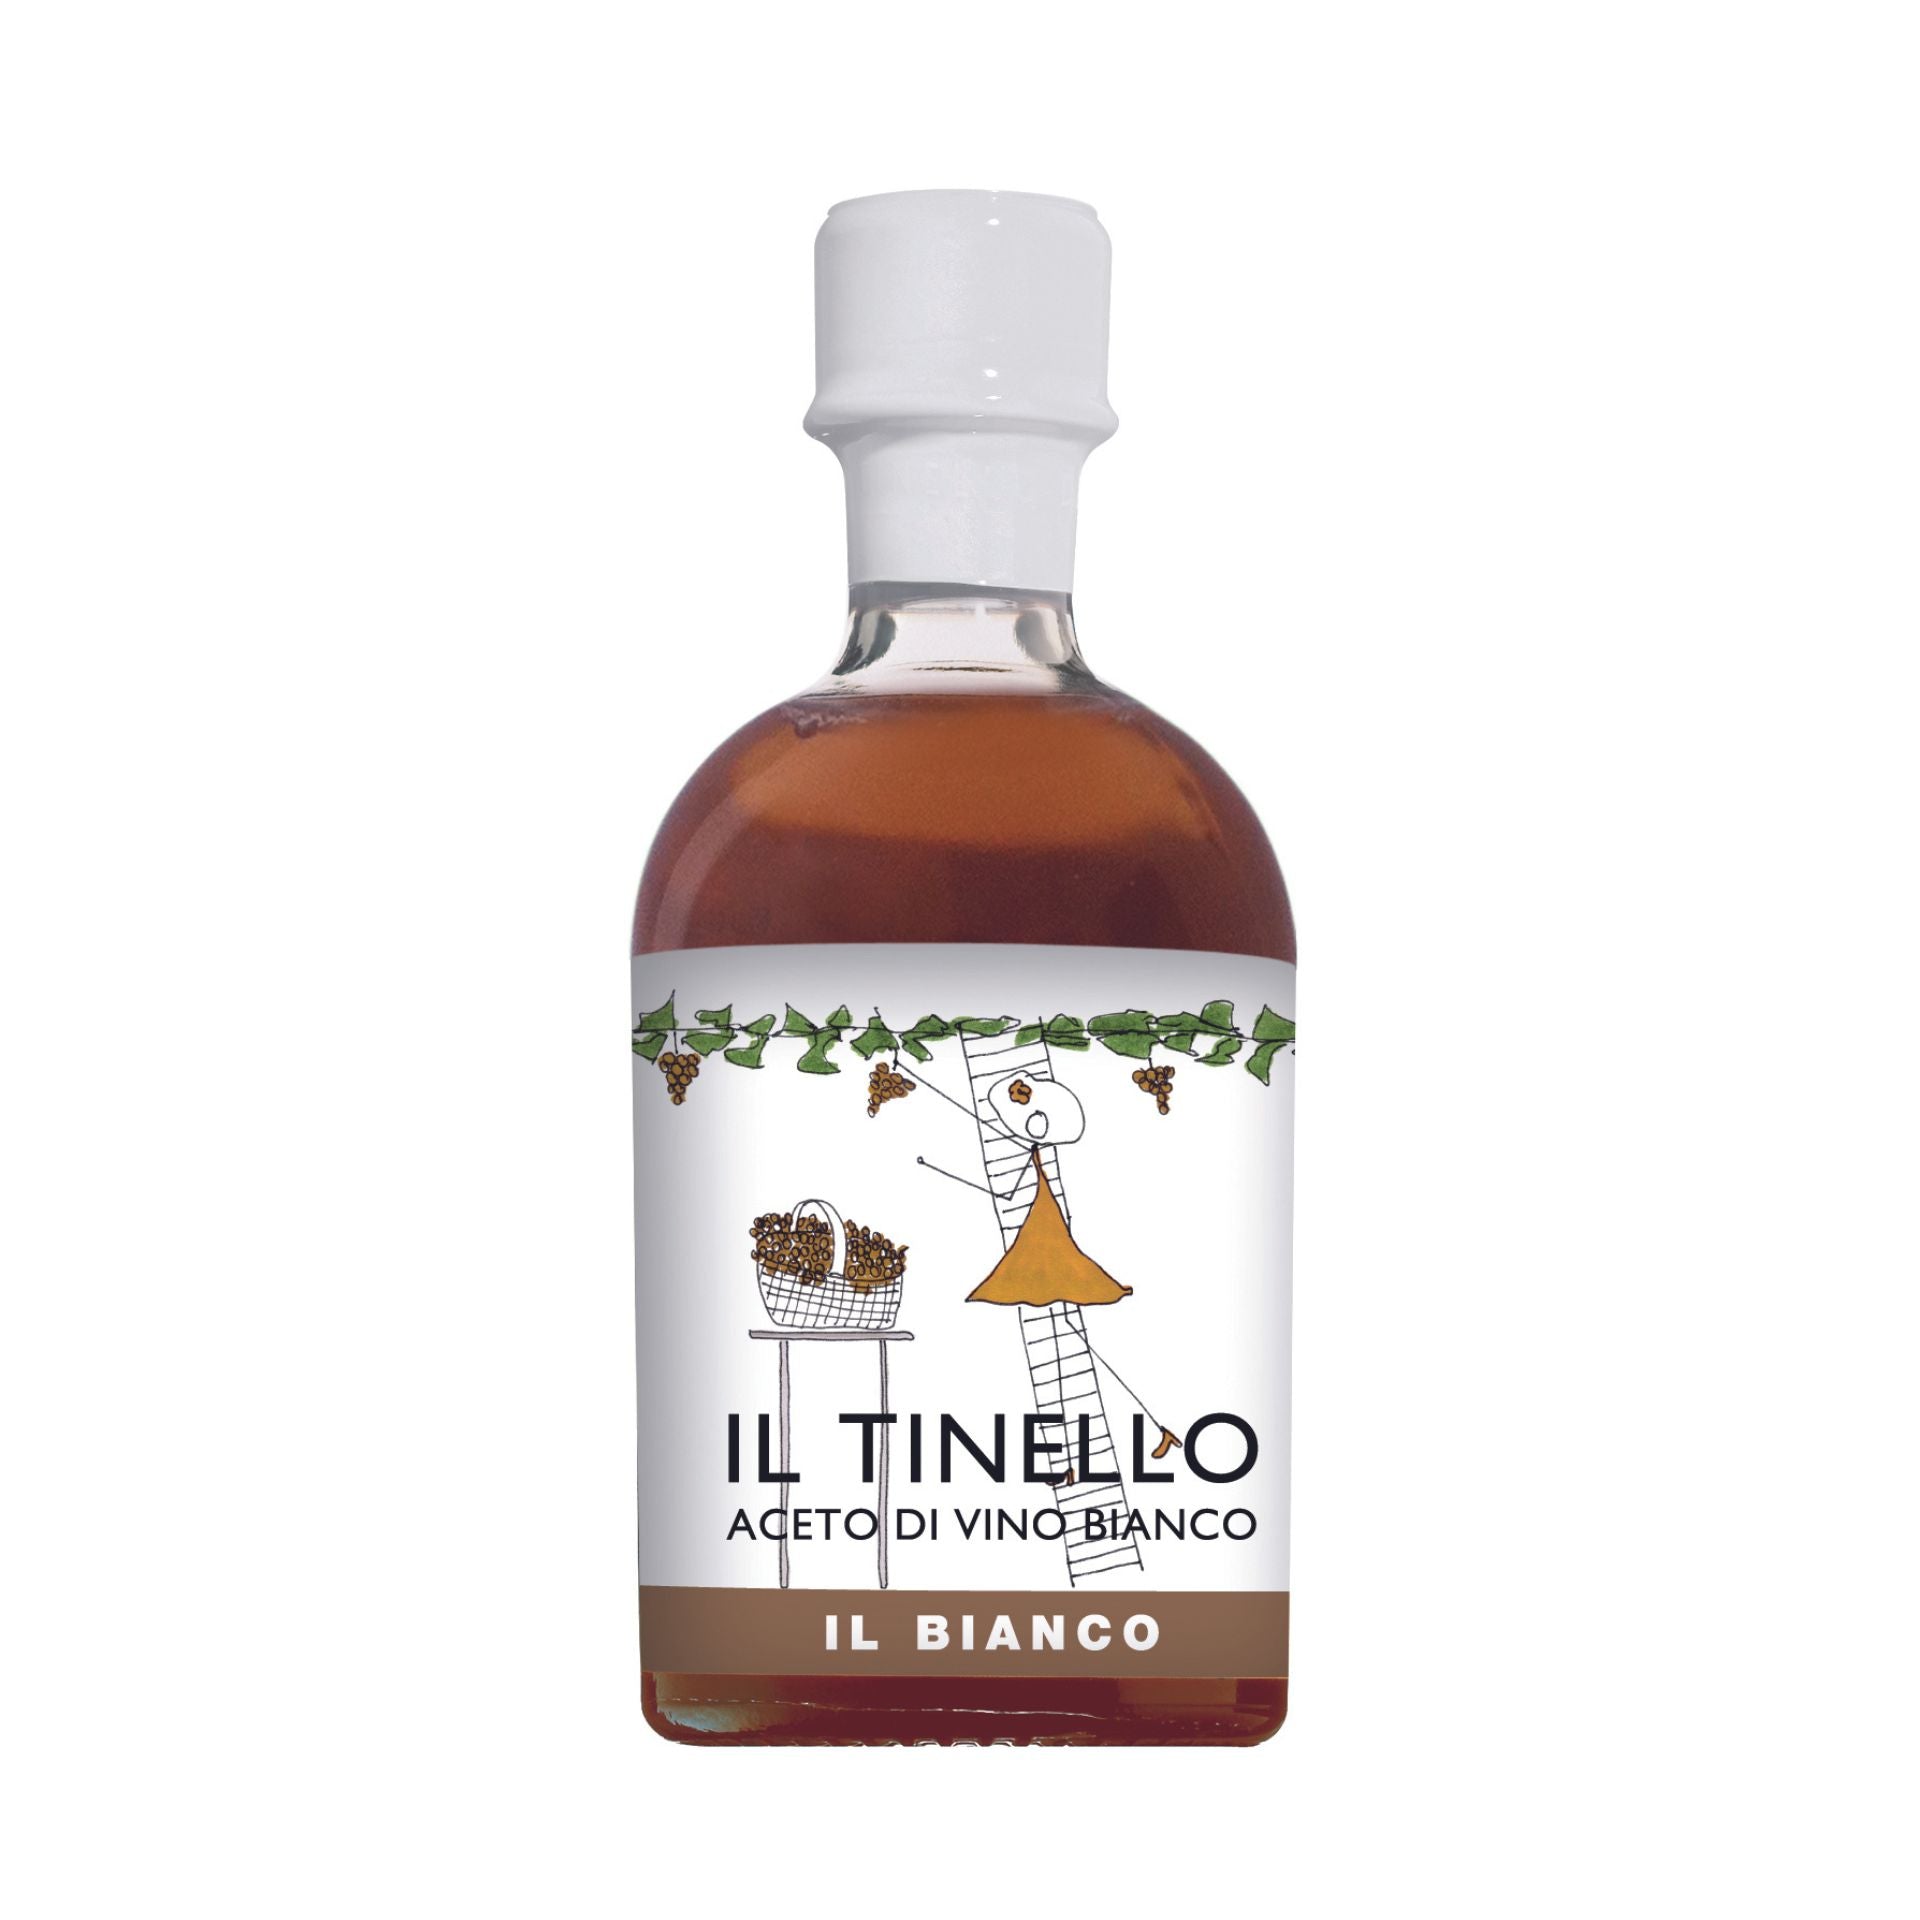 Il Borgo del Balsamico Il Tinello Il Bianco White Wine Vinegar 250ml  | Imported and distributed in the UK by Just Gourmet Foods